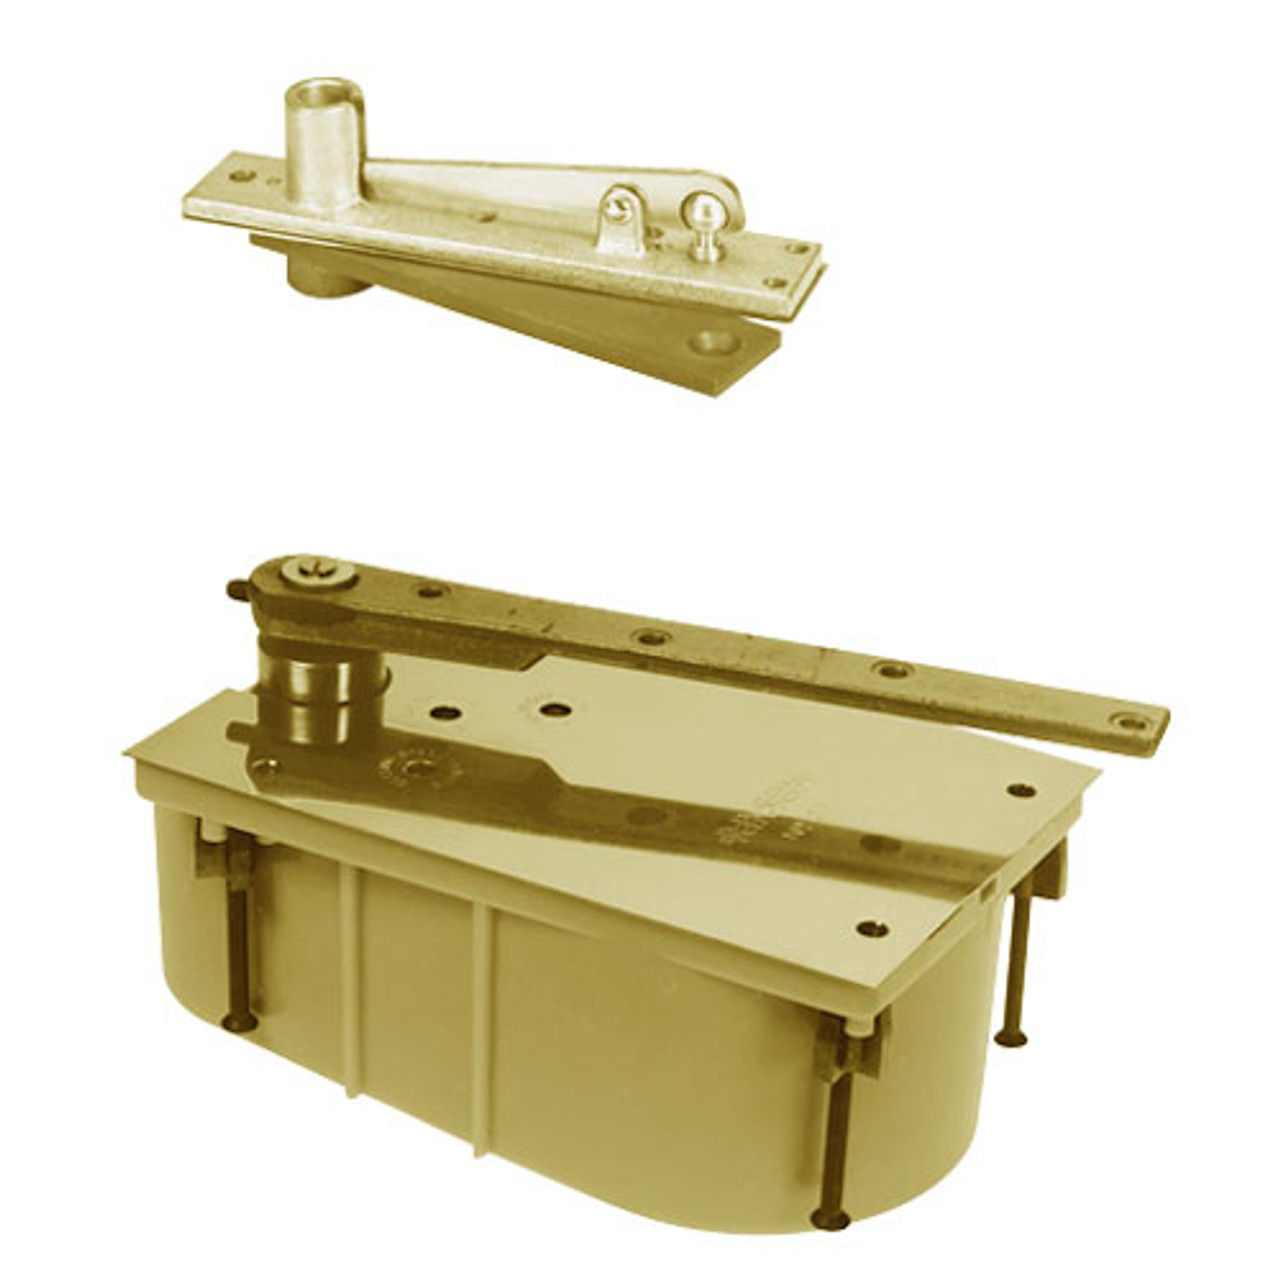 PH28-95N-554-CWF-RH-606 Rixson 28 Series Heavy Duty Single Acting Center Hung Floor Closer with Concealed Arm in Satin Brass Finish